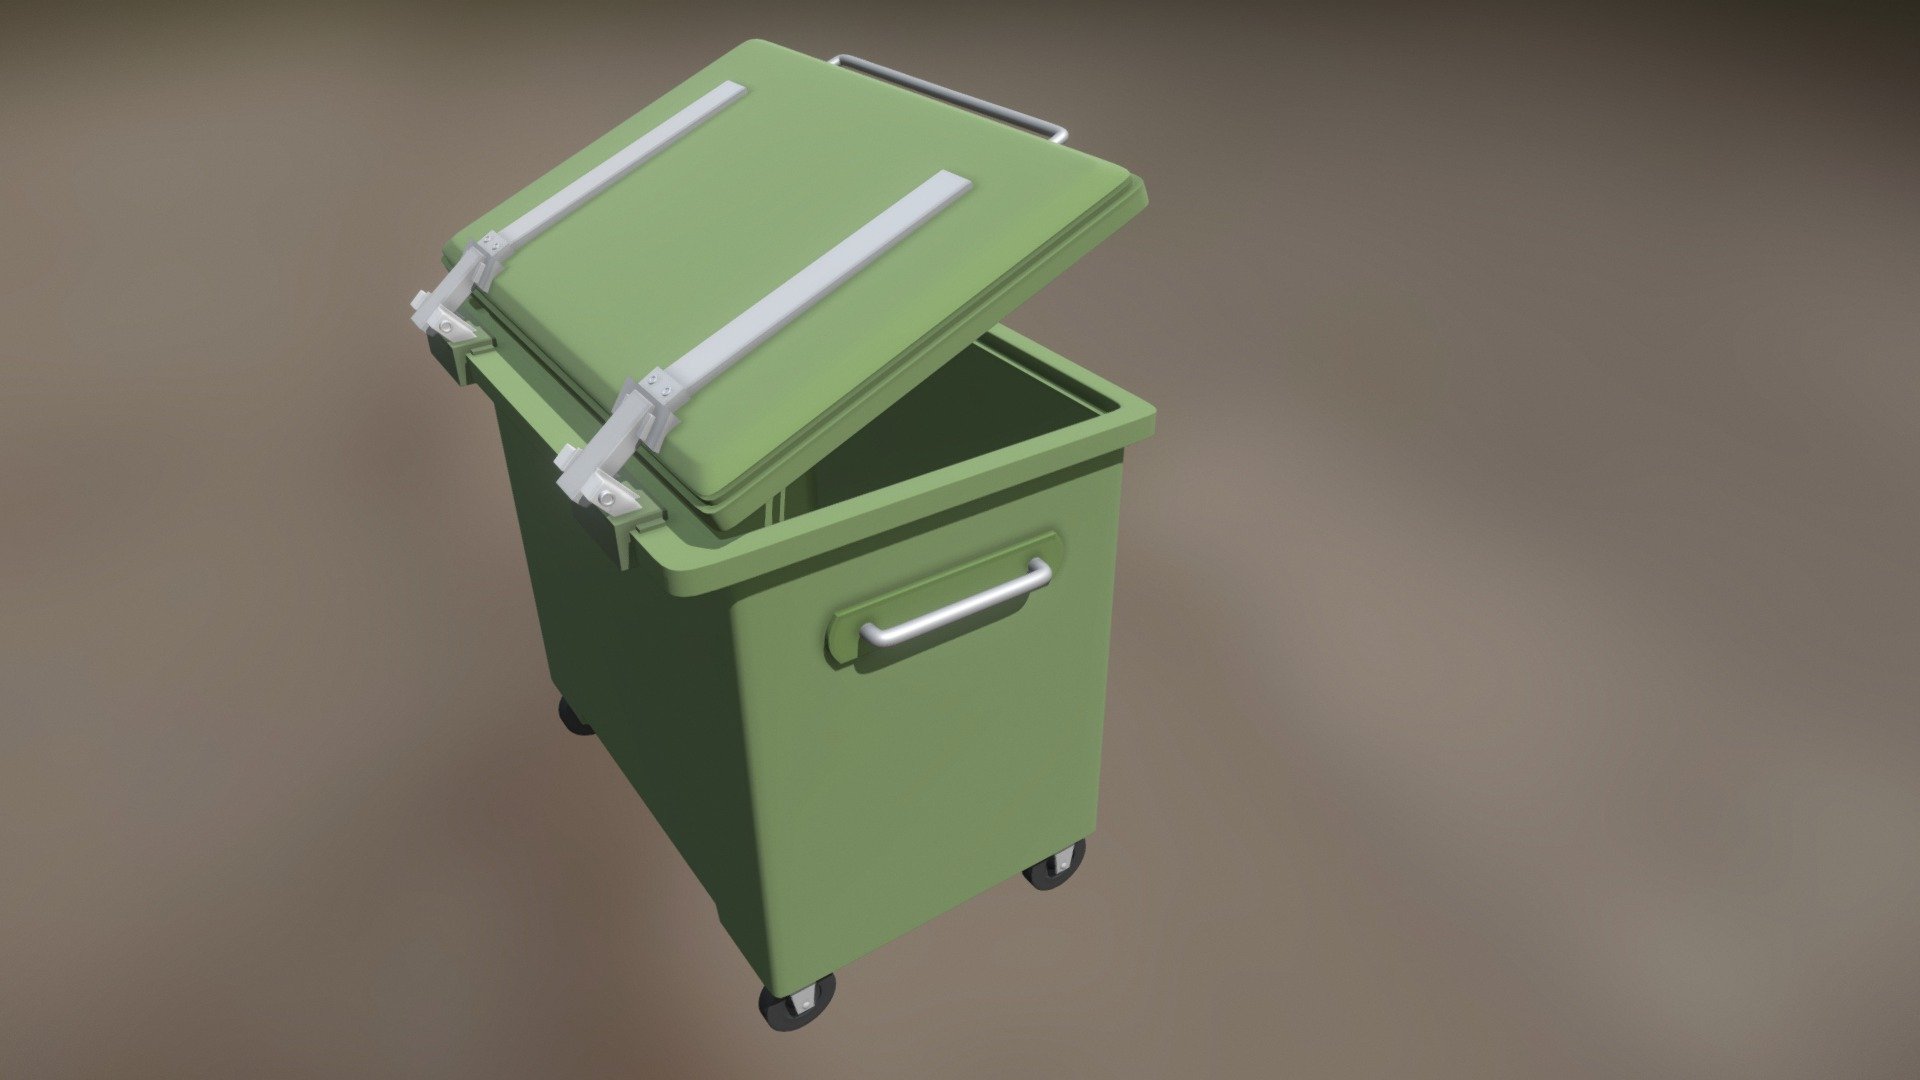 No textures, only materials.

This is a Portuguese style Dumpster made in blender 3d model